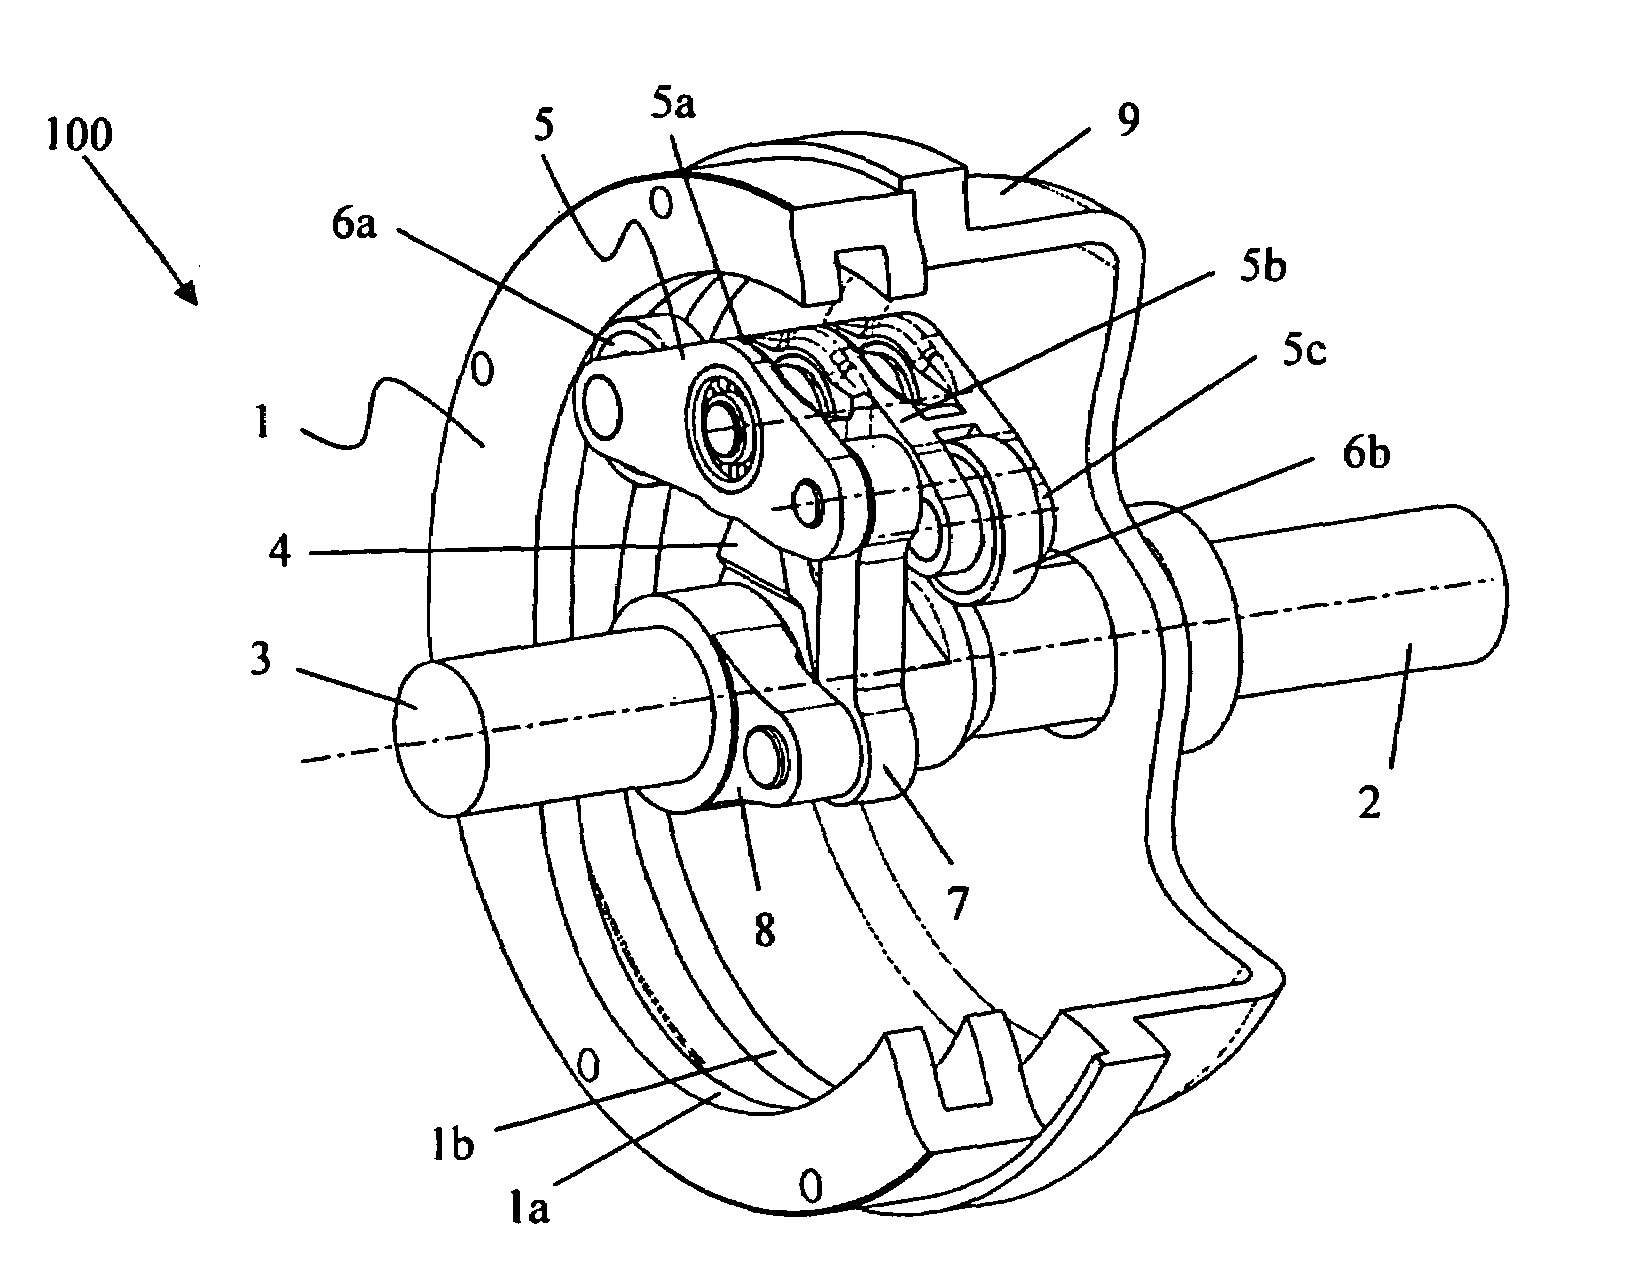 Device for modulating a first rotational motion of an input shaft to a second, different from the first, rotational motion of an output shaft in textile machines